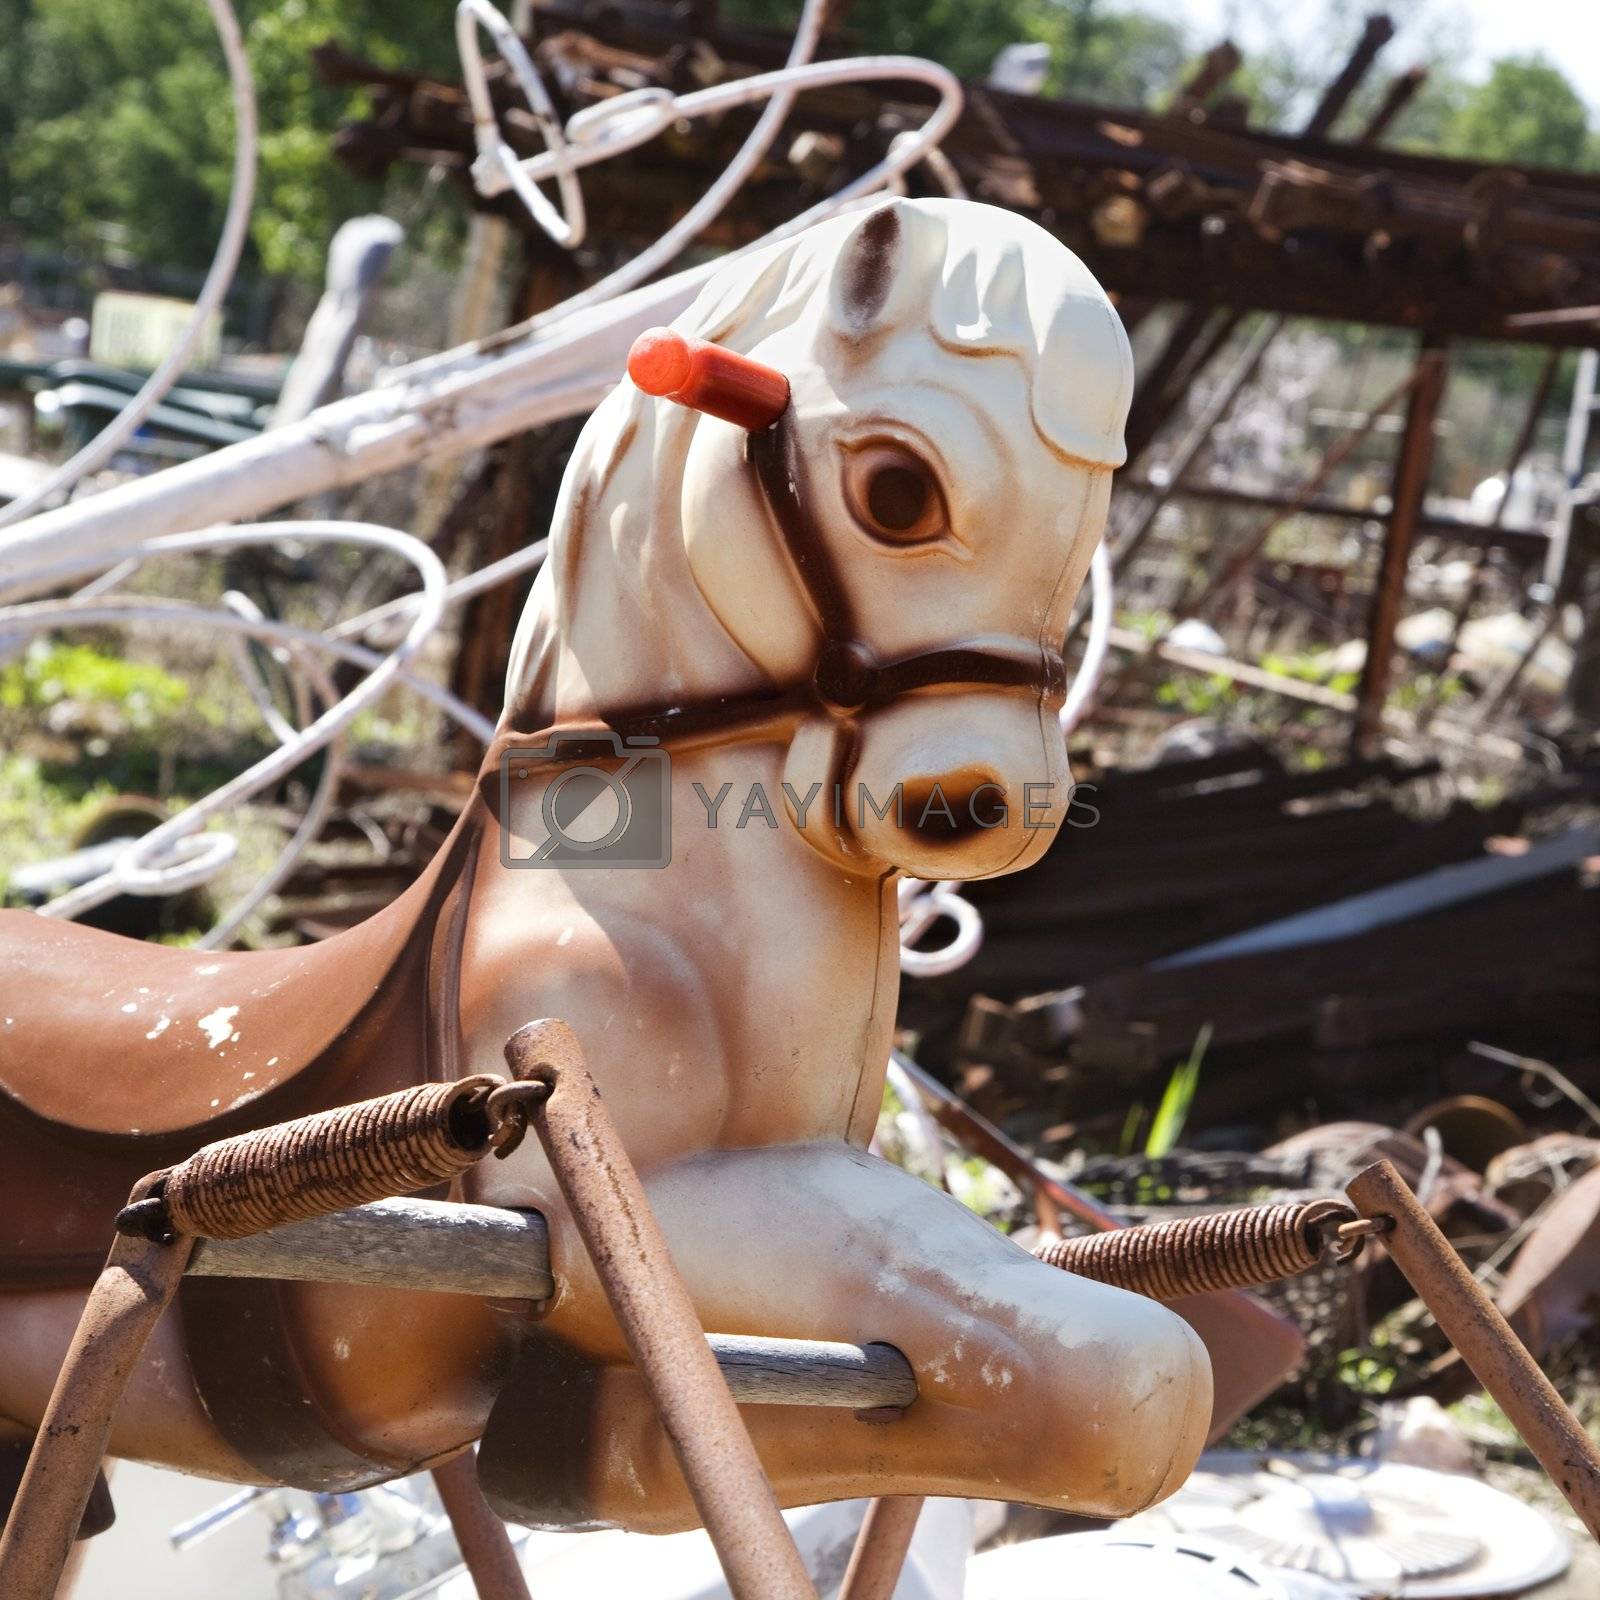 Royalty free image of Old toy horse by iofoto